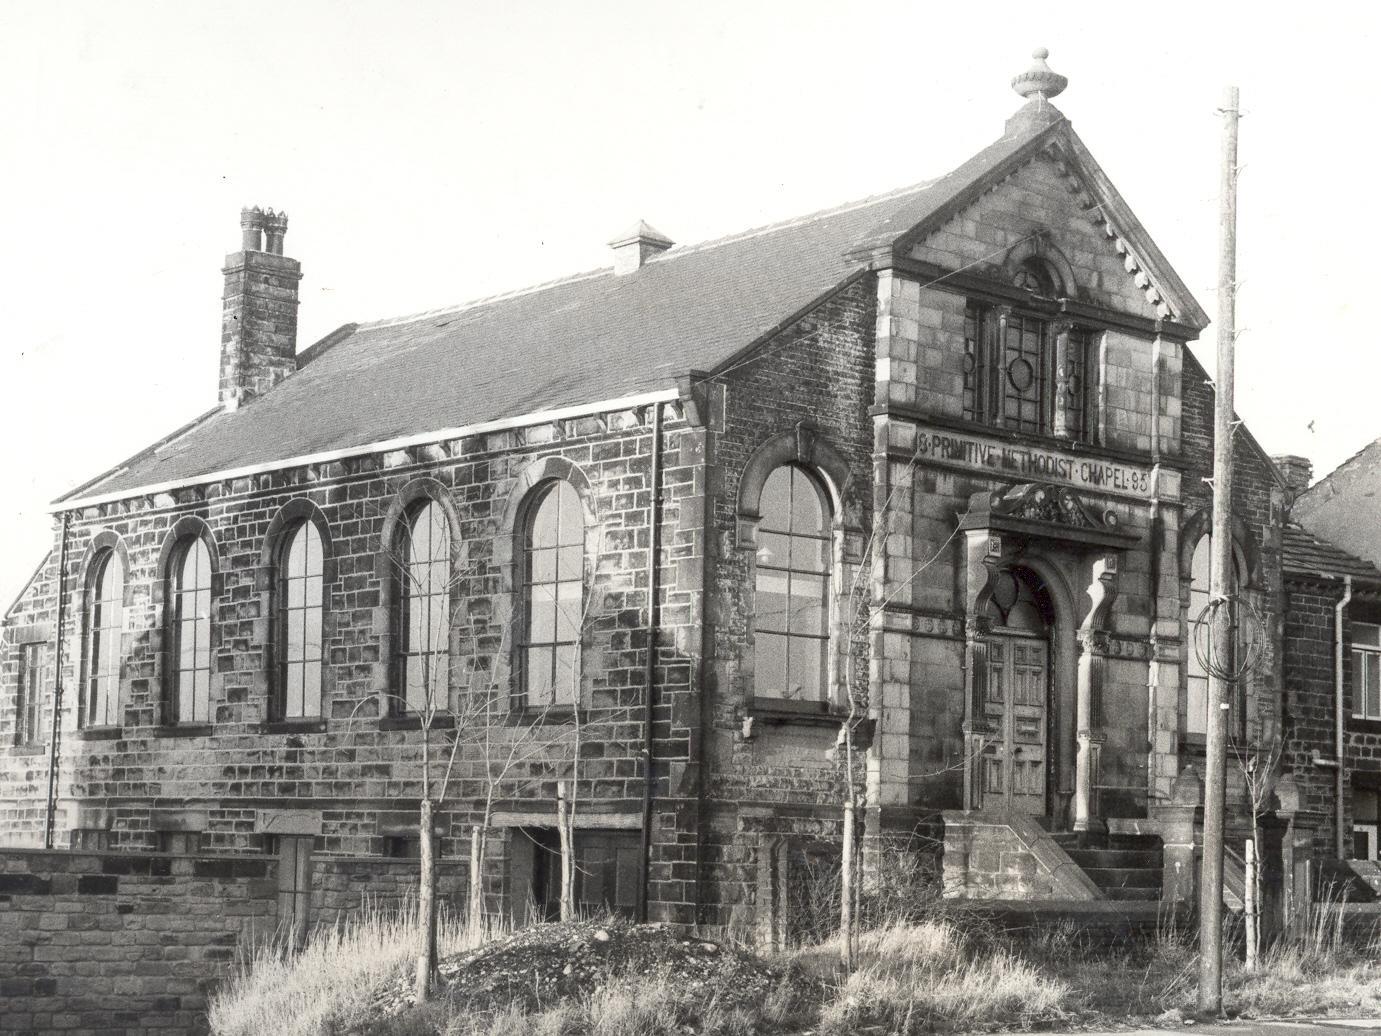 Architect Richard Day and his family were making their home in this 85-year-old Methodist chapel on Howden Clough Road.